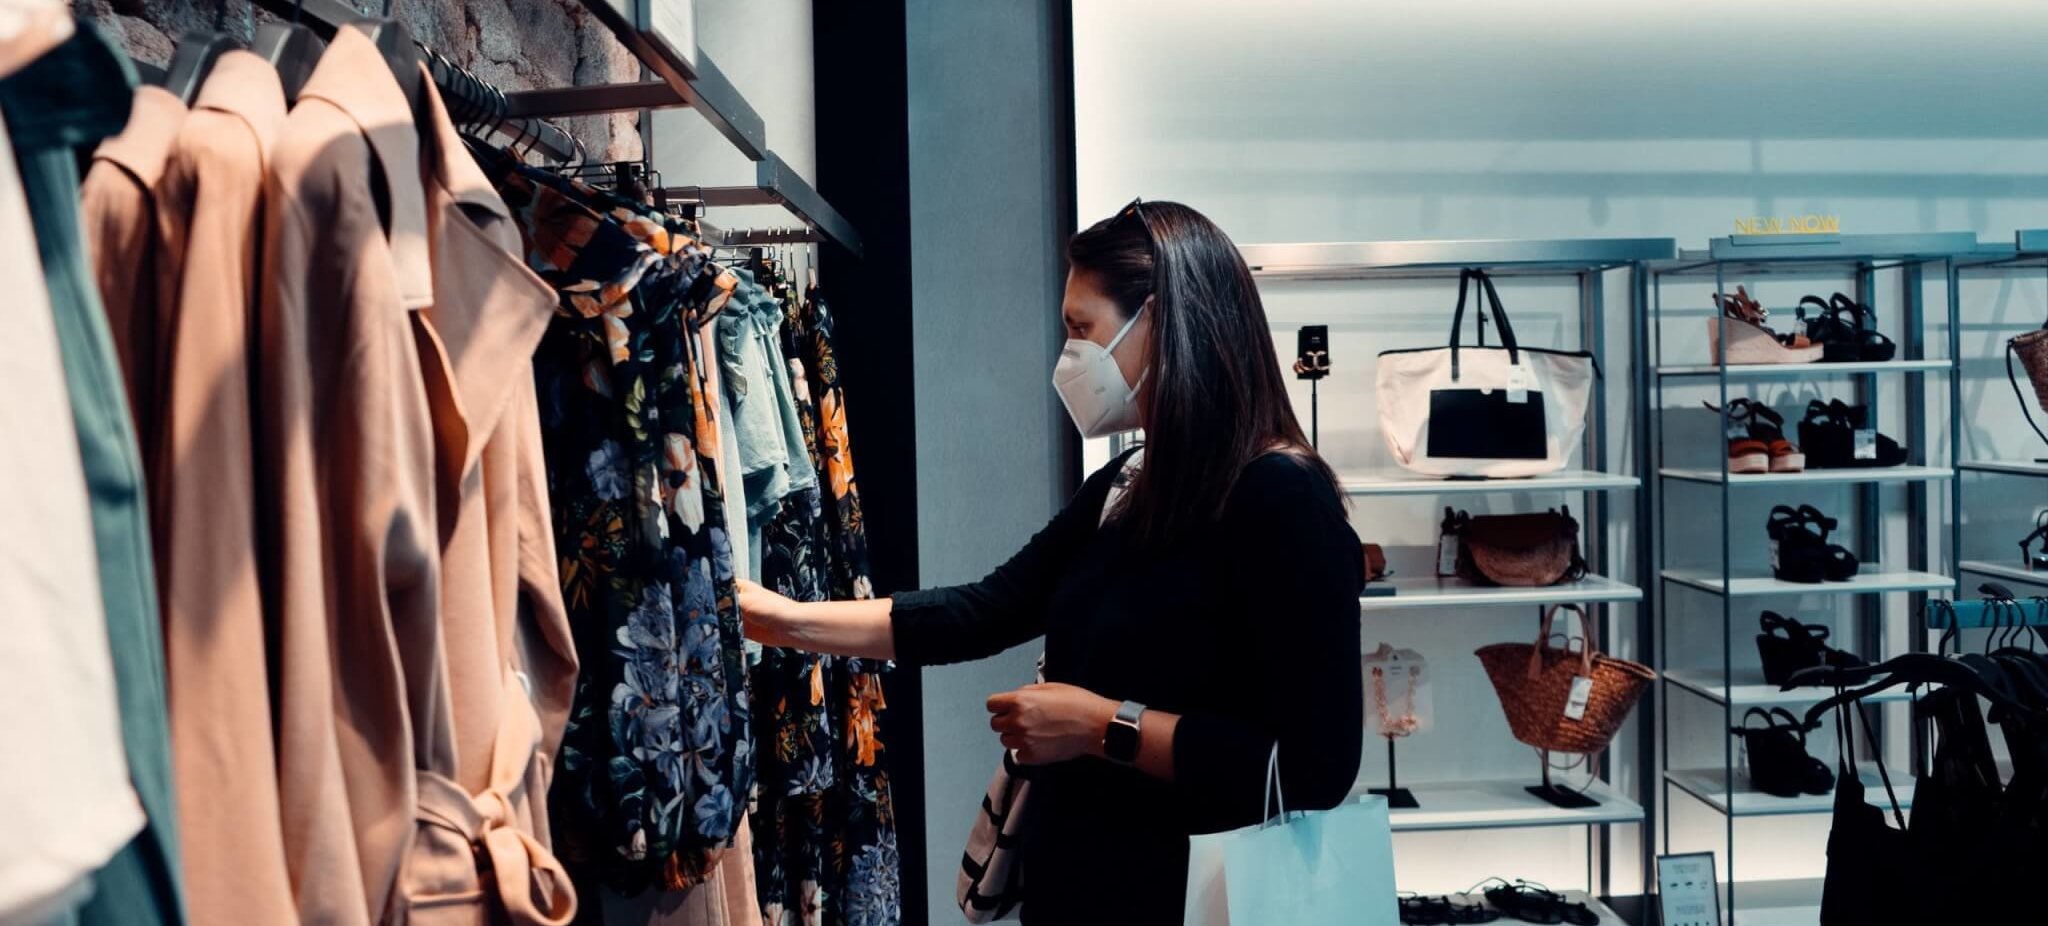 A woman shopping in a clothing store wearing a mask to protect herself from covid-19